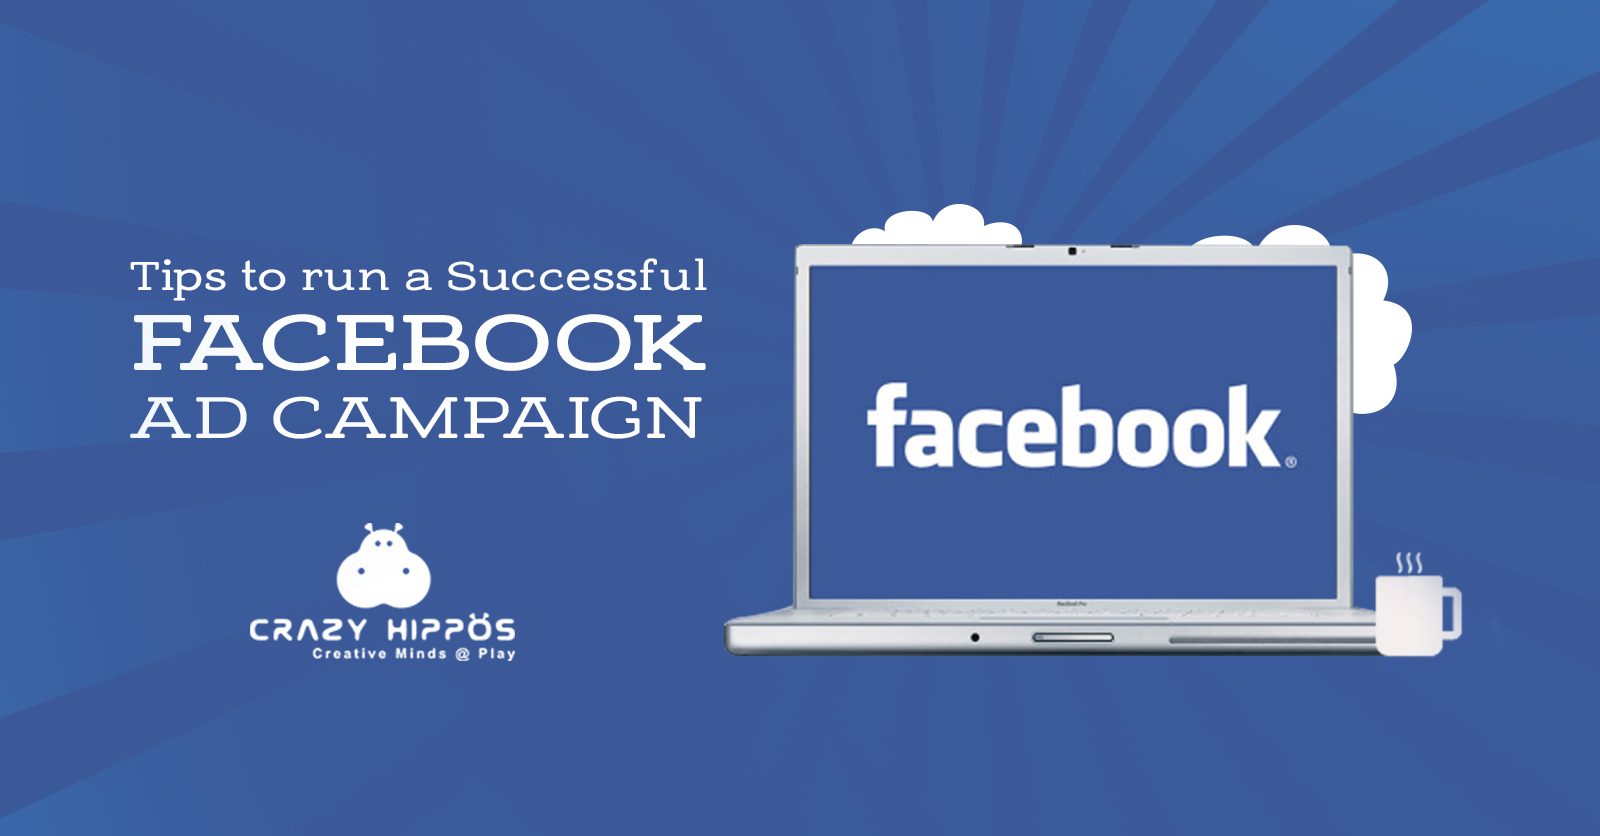 TIPS TO RUN A SUCCESSFUL FACEBOOK AD CAMPAIGN